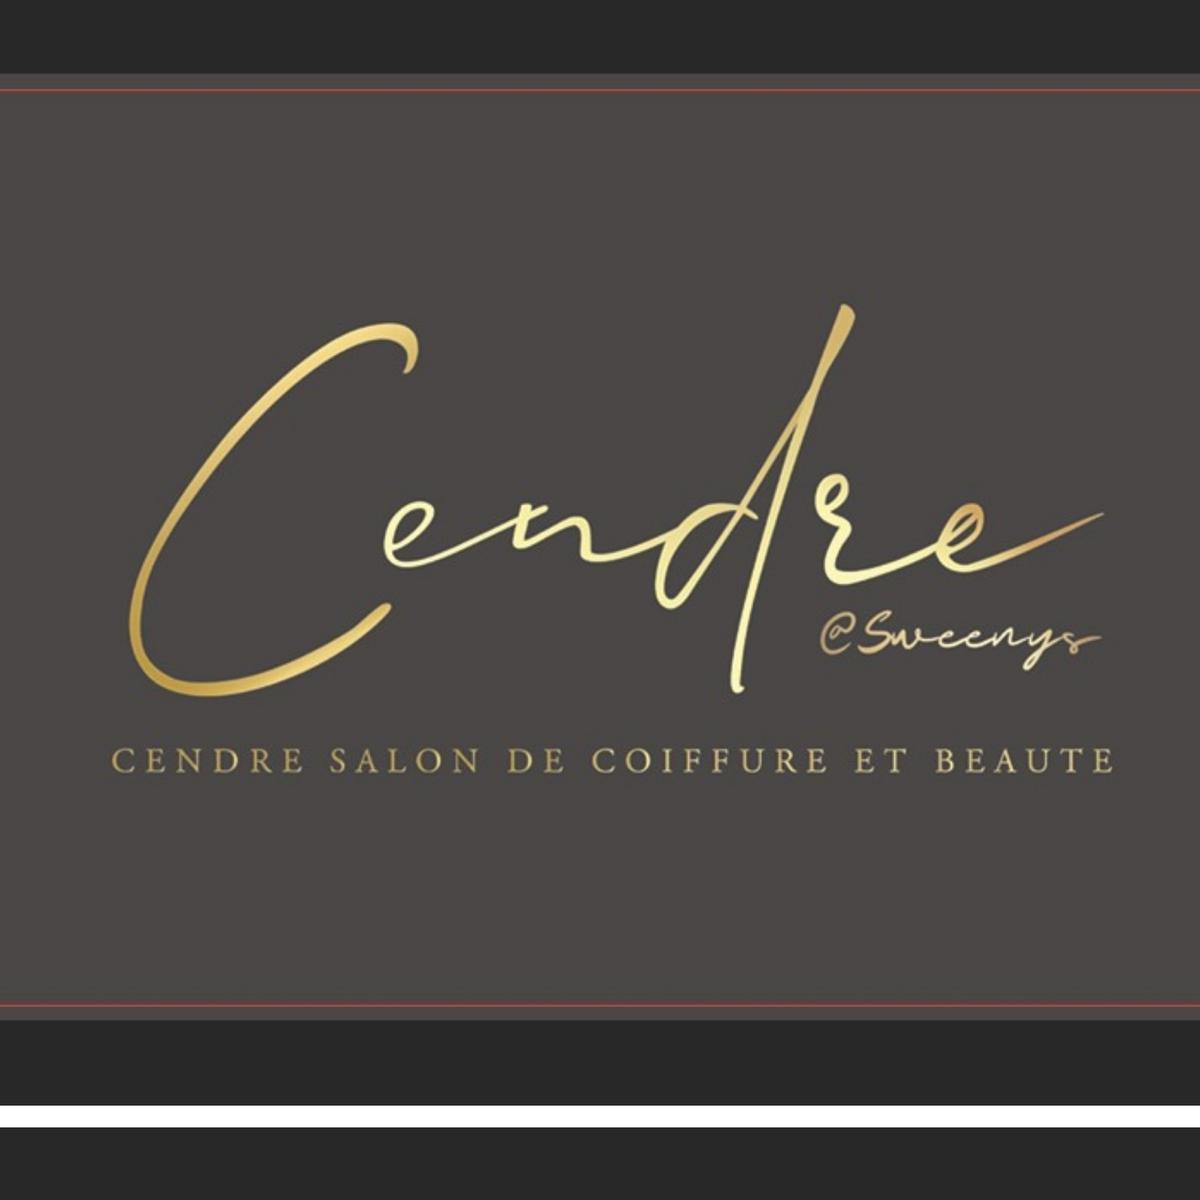 Cendre@Sweenys's images